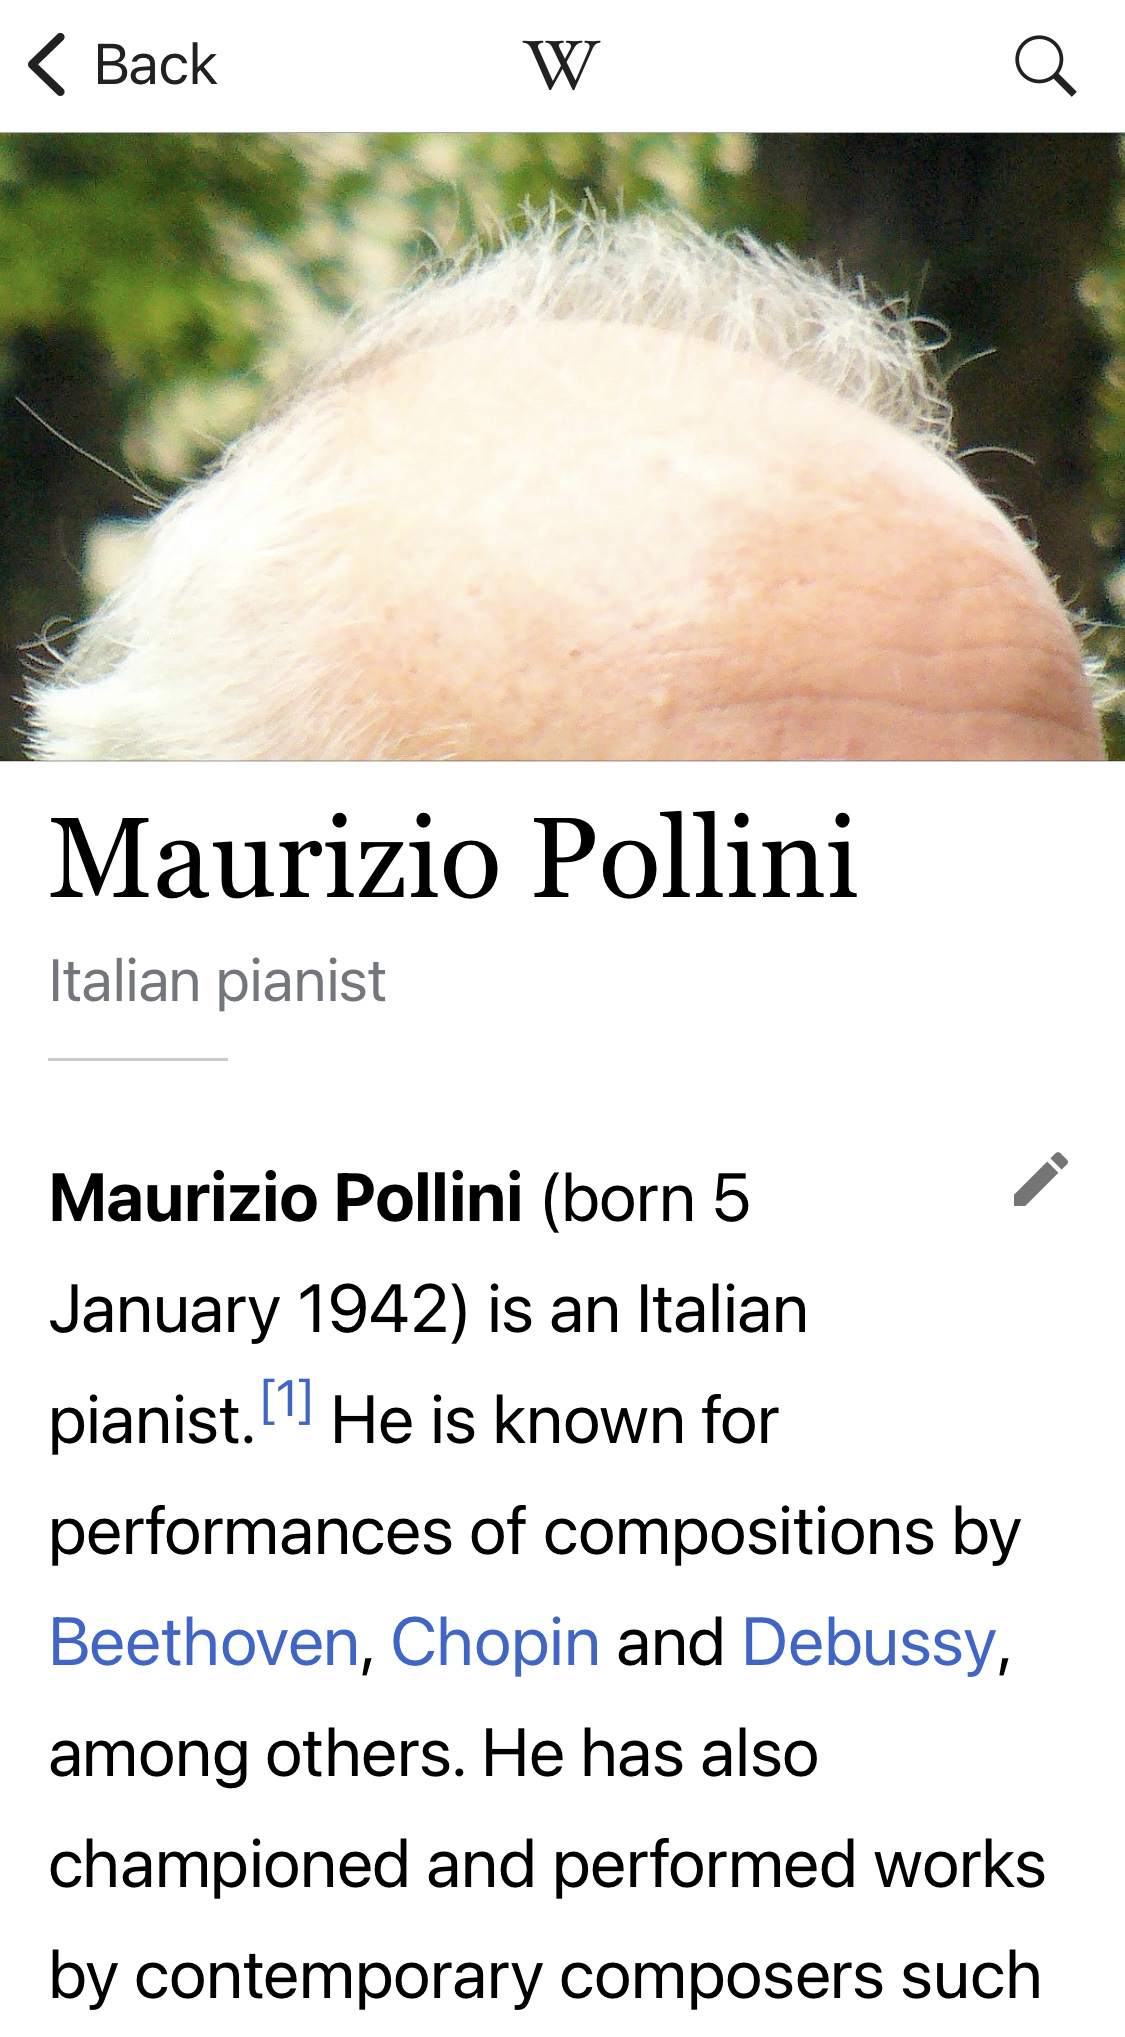 Screenshot of Maurizio Pollini’s entry in Wikipedia. The photo is cropped to show only the top of his bald head.